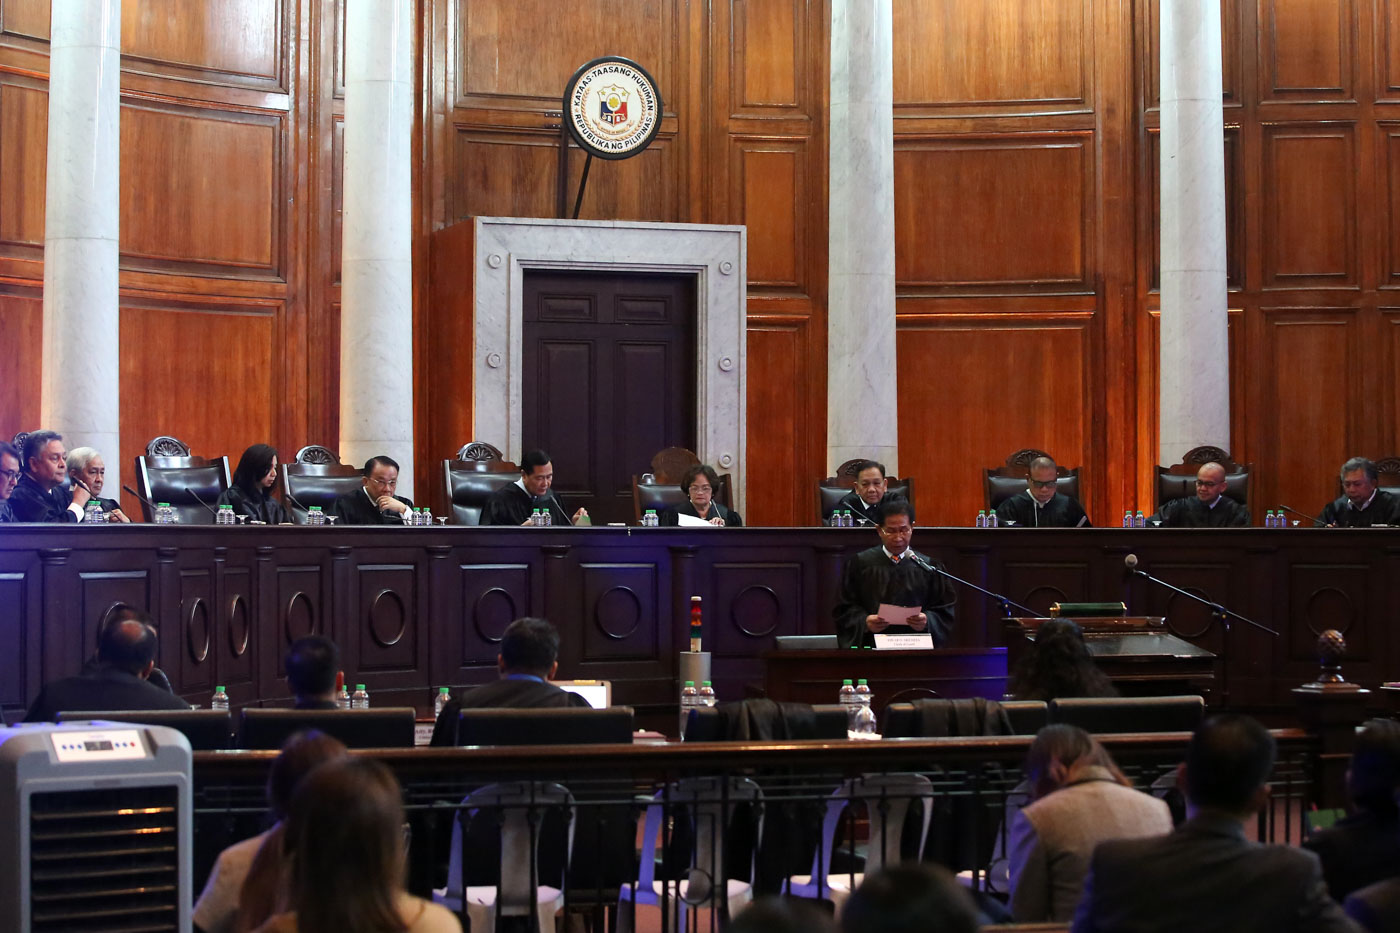 EN BANC. The Supreme Court usually meets en banc Tuesdays of every week. File photo by Ben Nabong/Rappler 